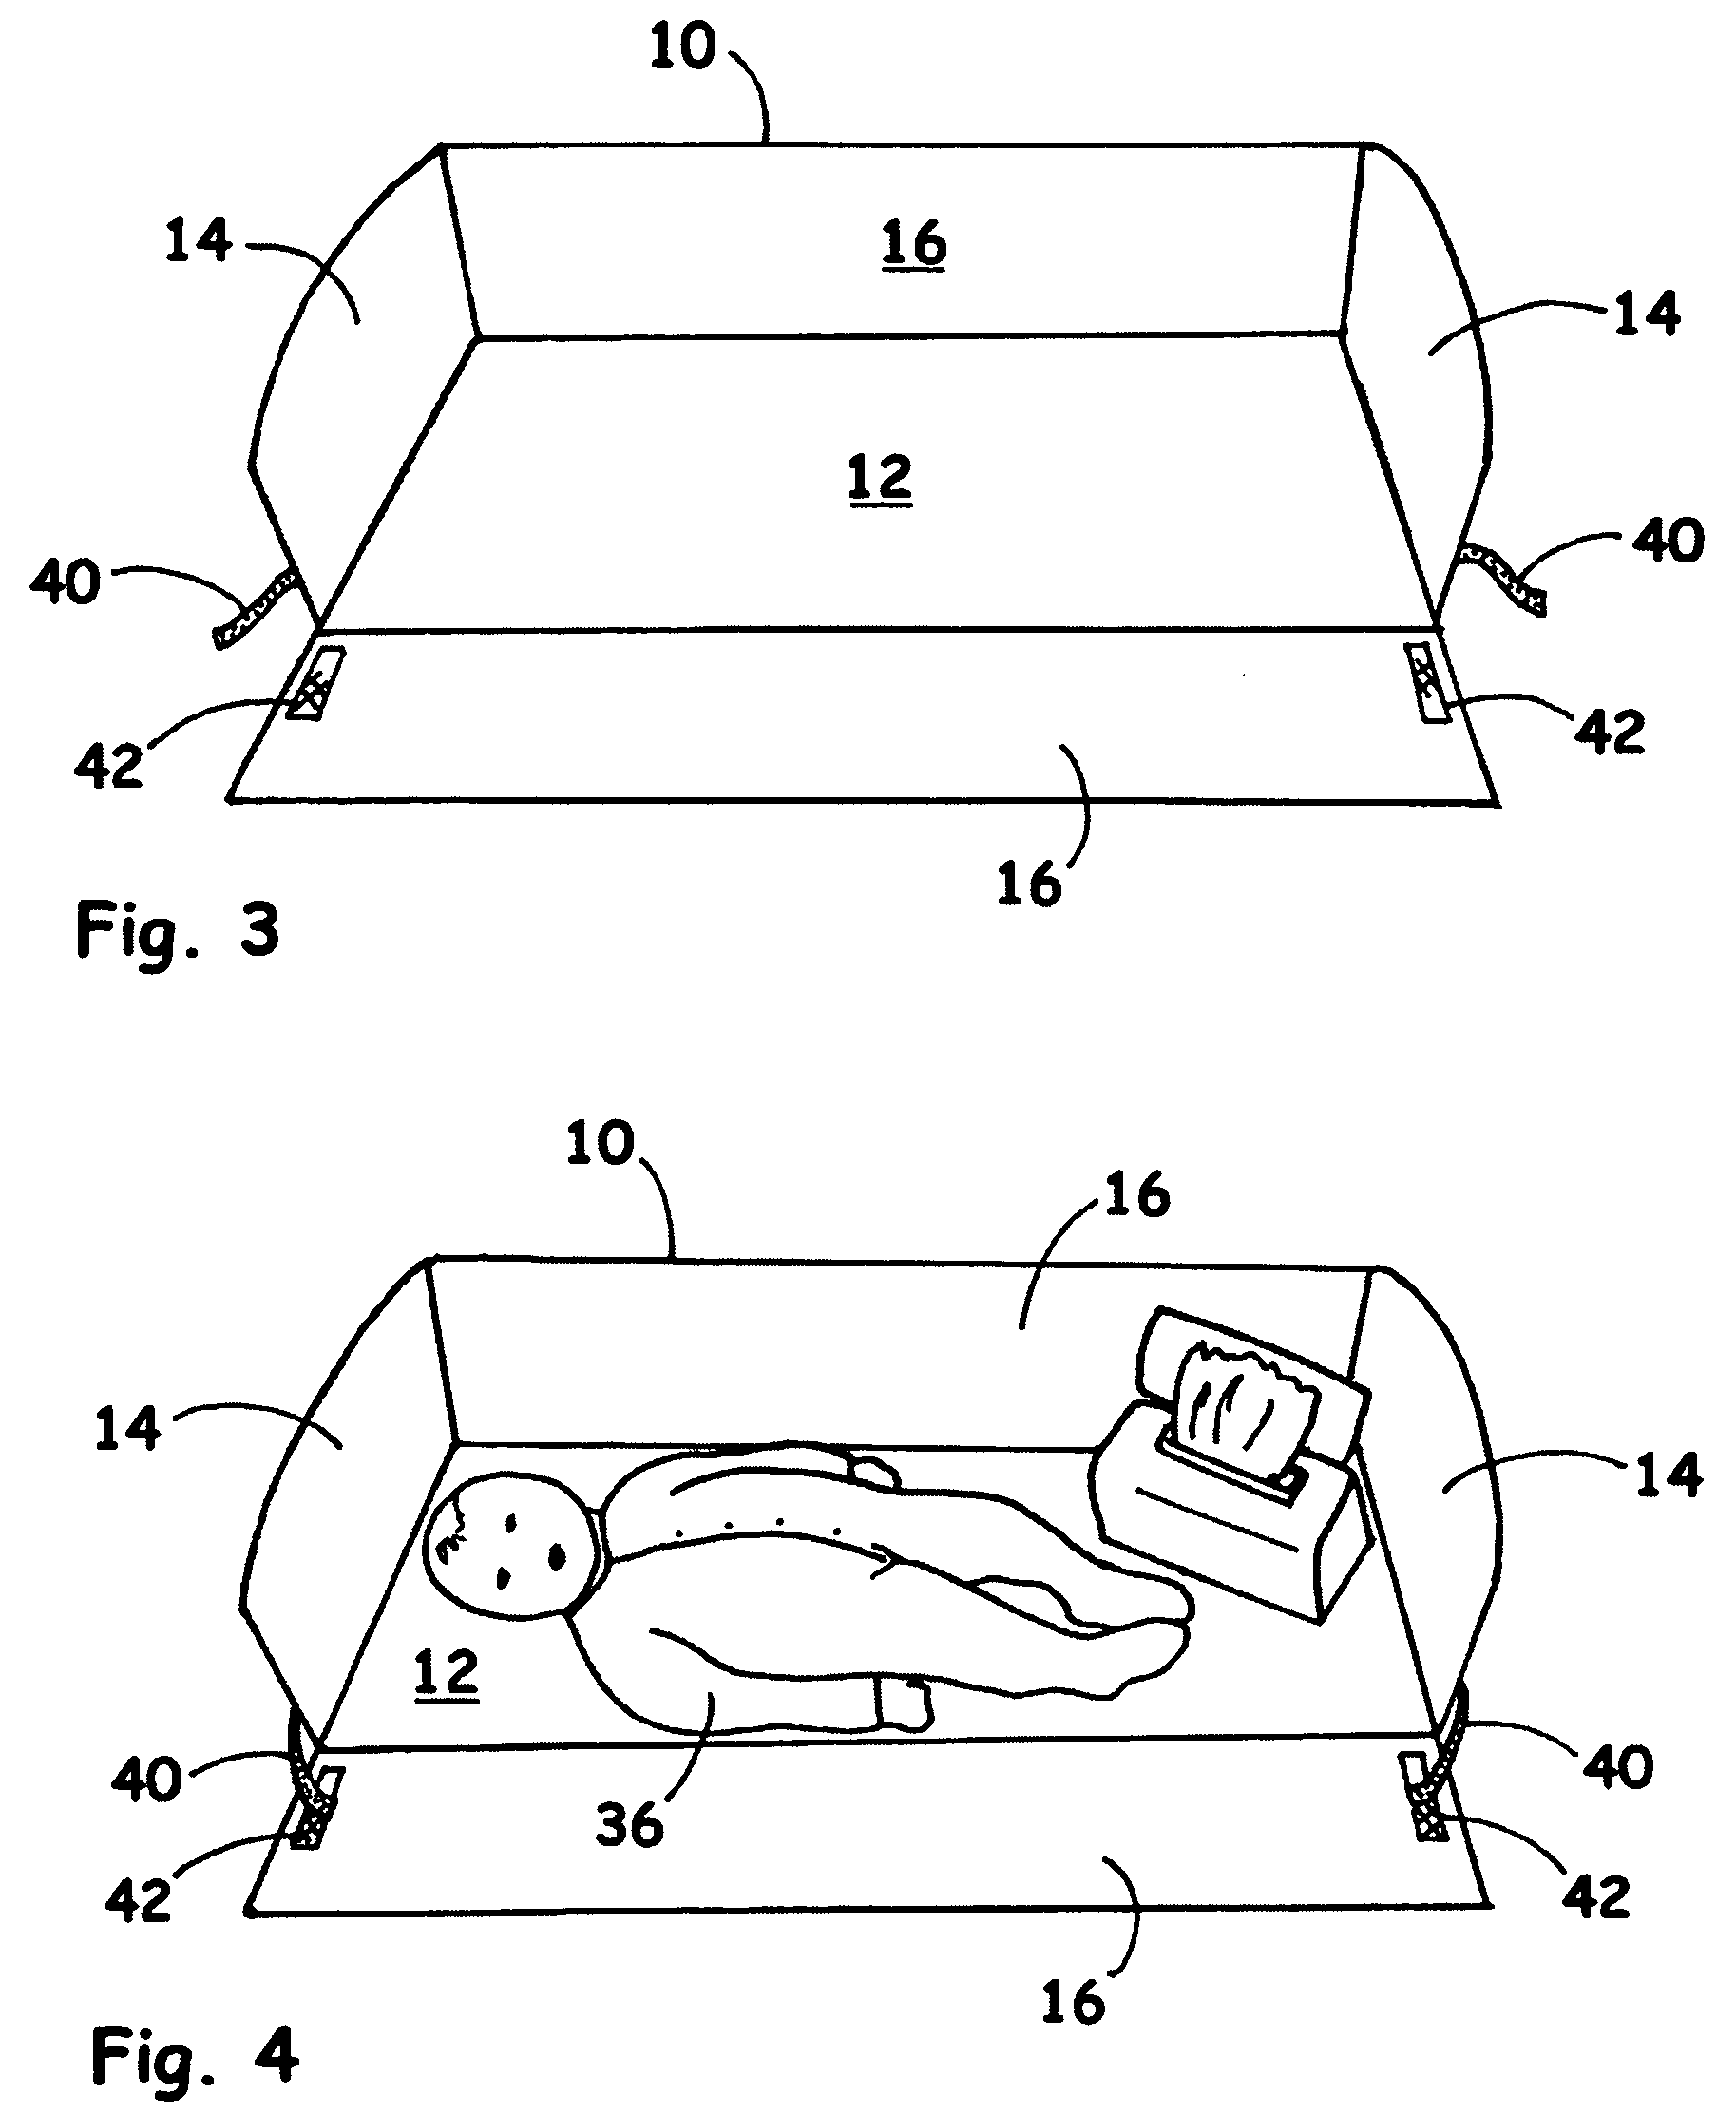 Infant pad assembly with multiple configurations